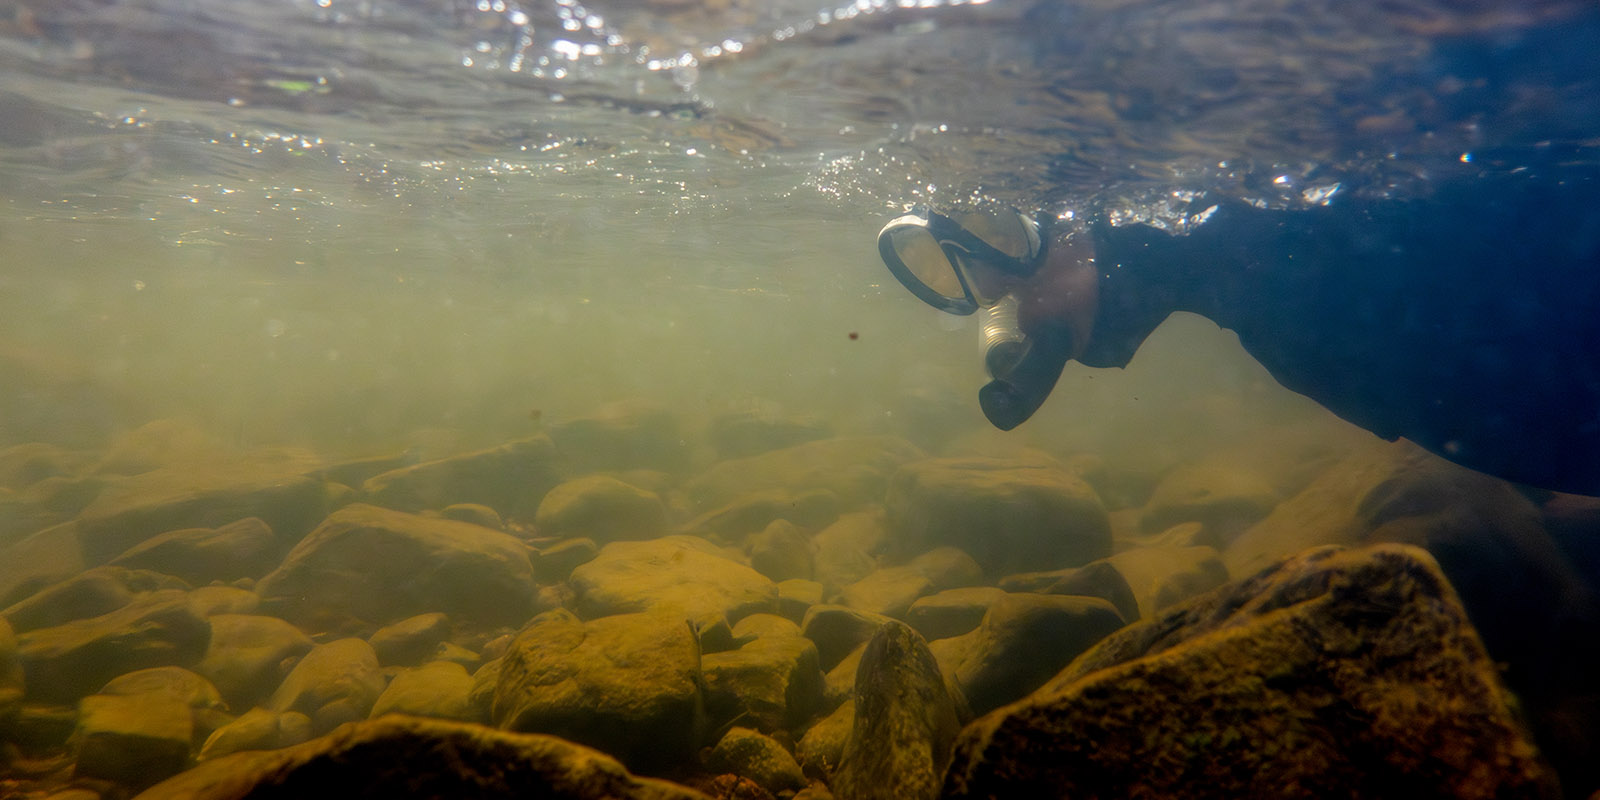 An image of a person snorkeling to search for darters in a murky river